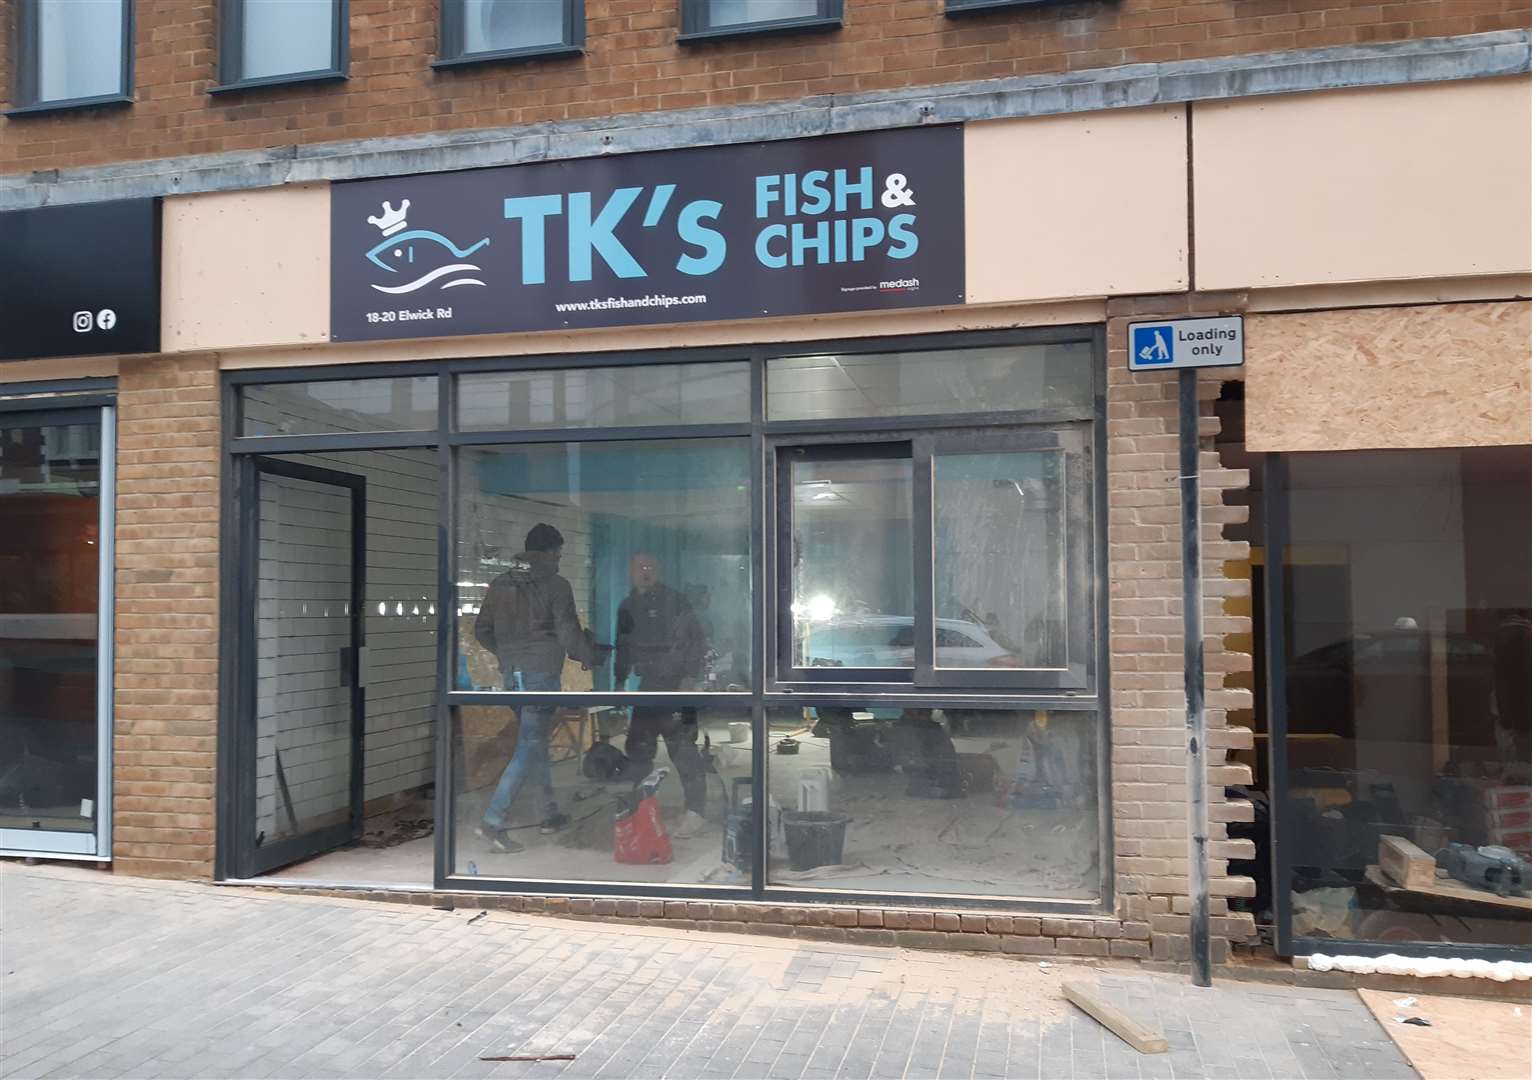 Work is ongoing to kit out the new TK's Fish and Chips